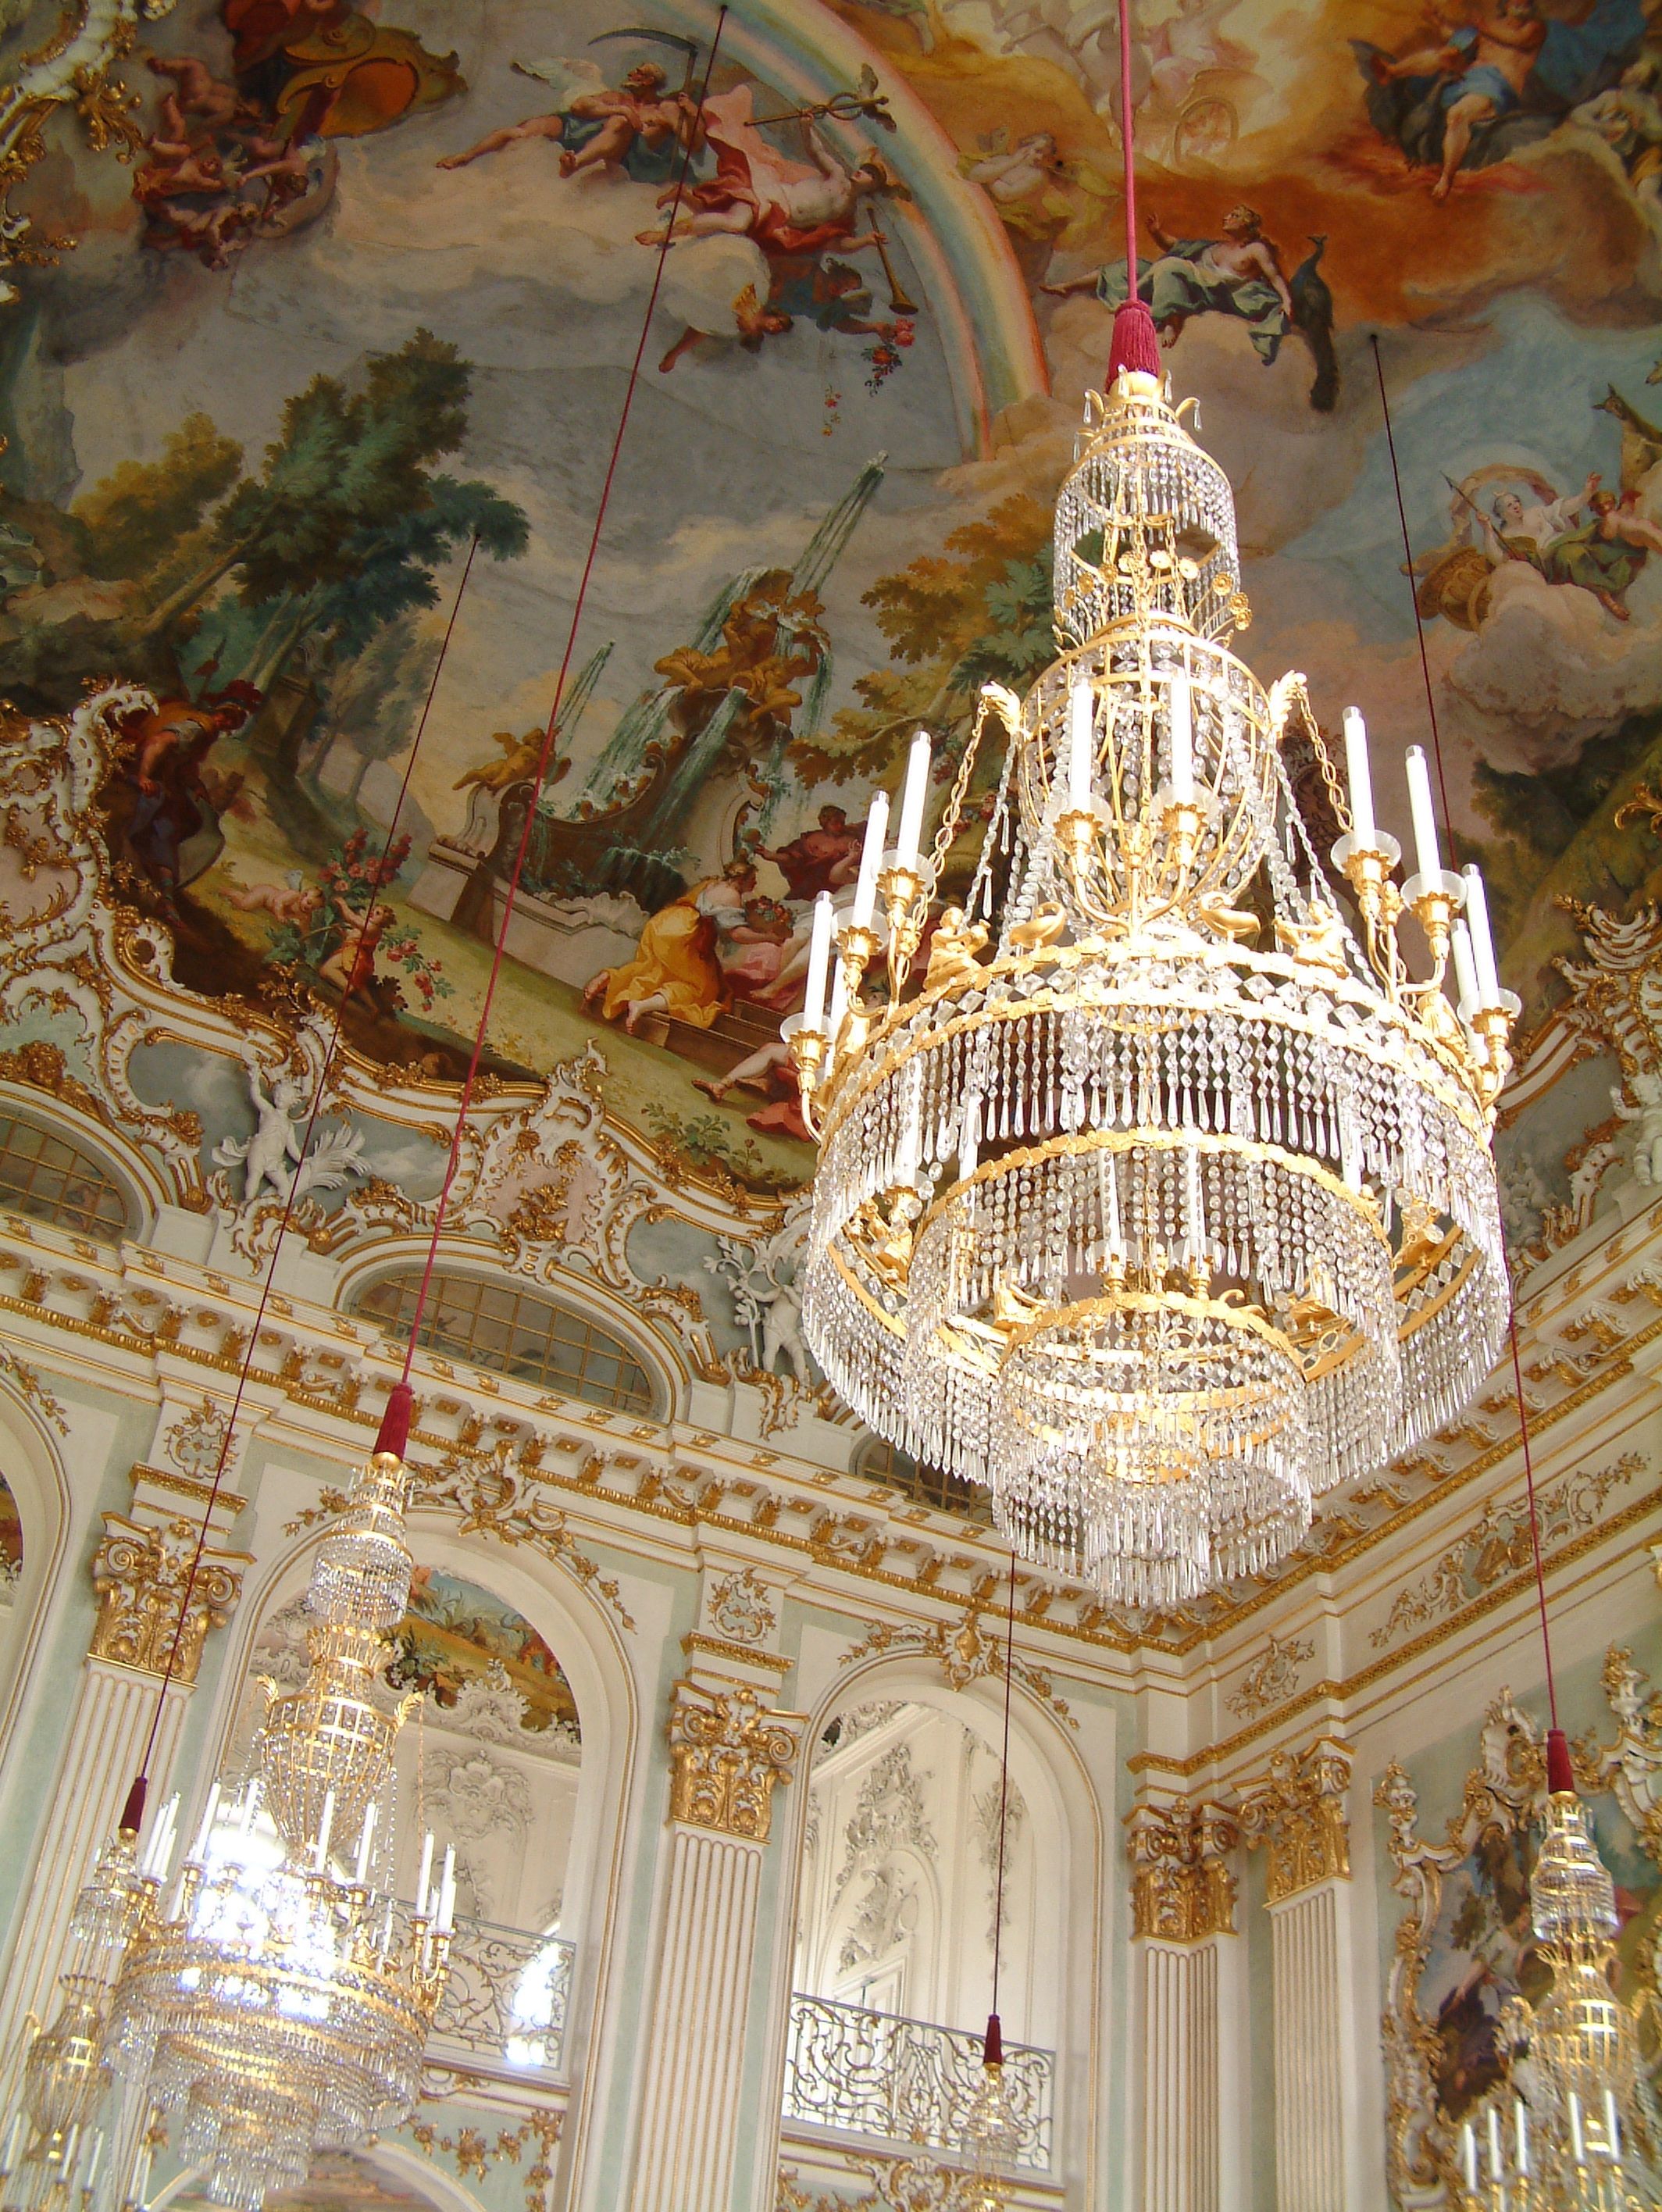 Ornate Chandeliers In The Nymphenburg Palace On The Outskirts Of Inside Ornate Chandeliers (View 12 of 12)